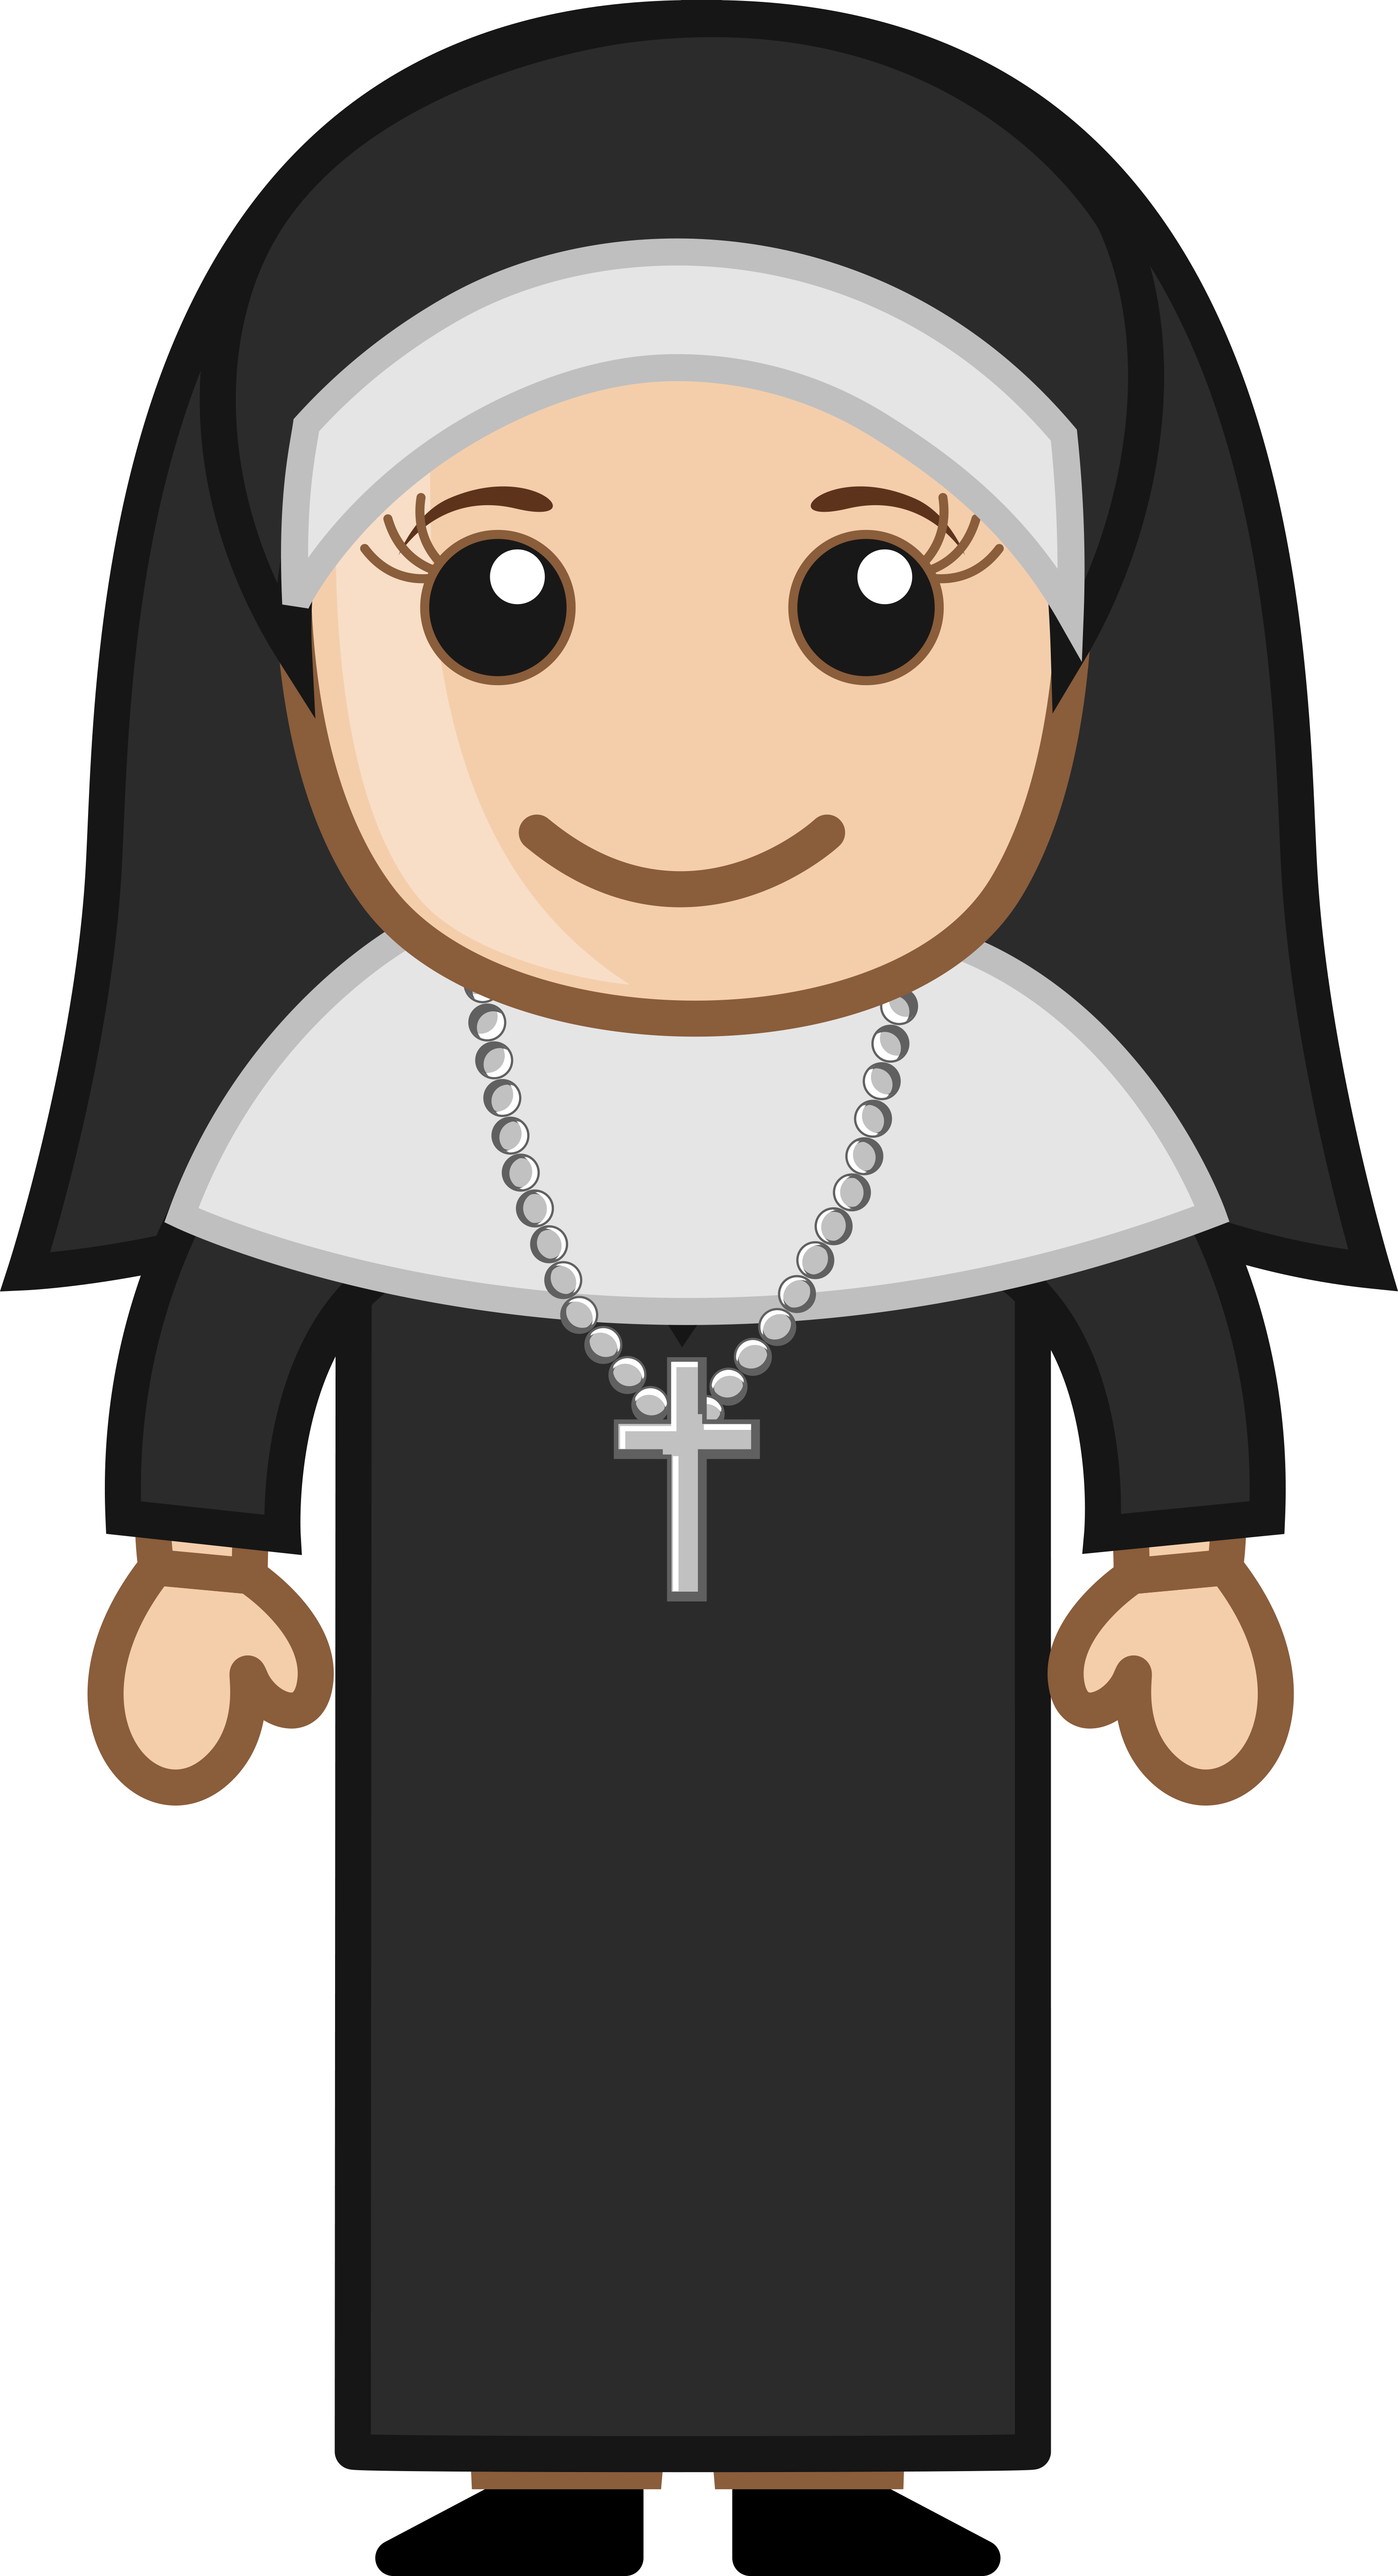 Catholic Nun Clipart Free Images And Illustrations Clip Art Library ...